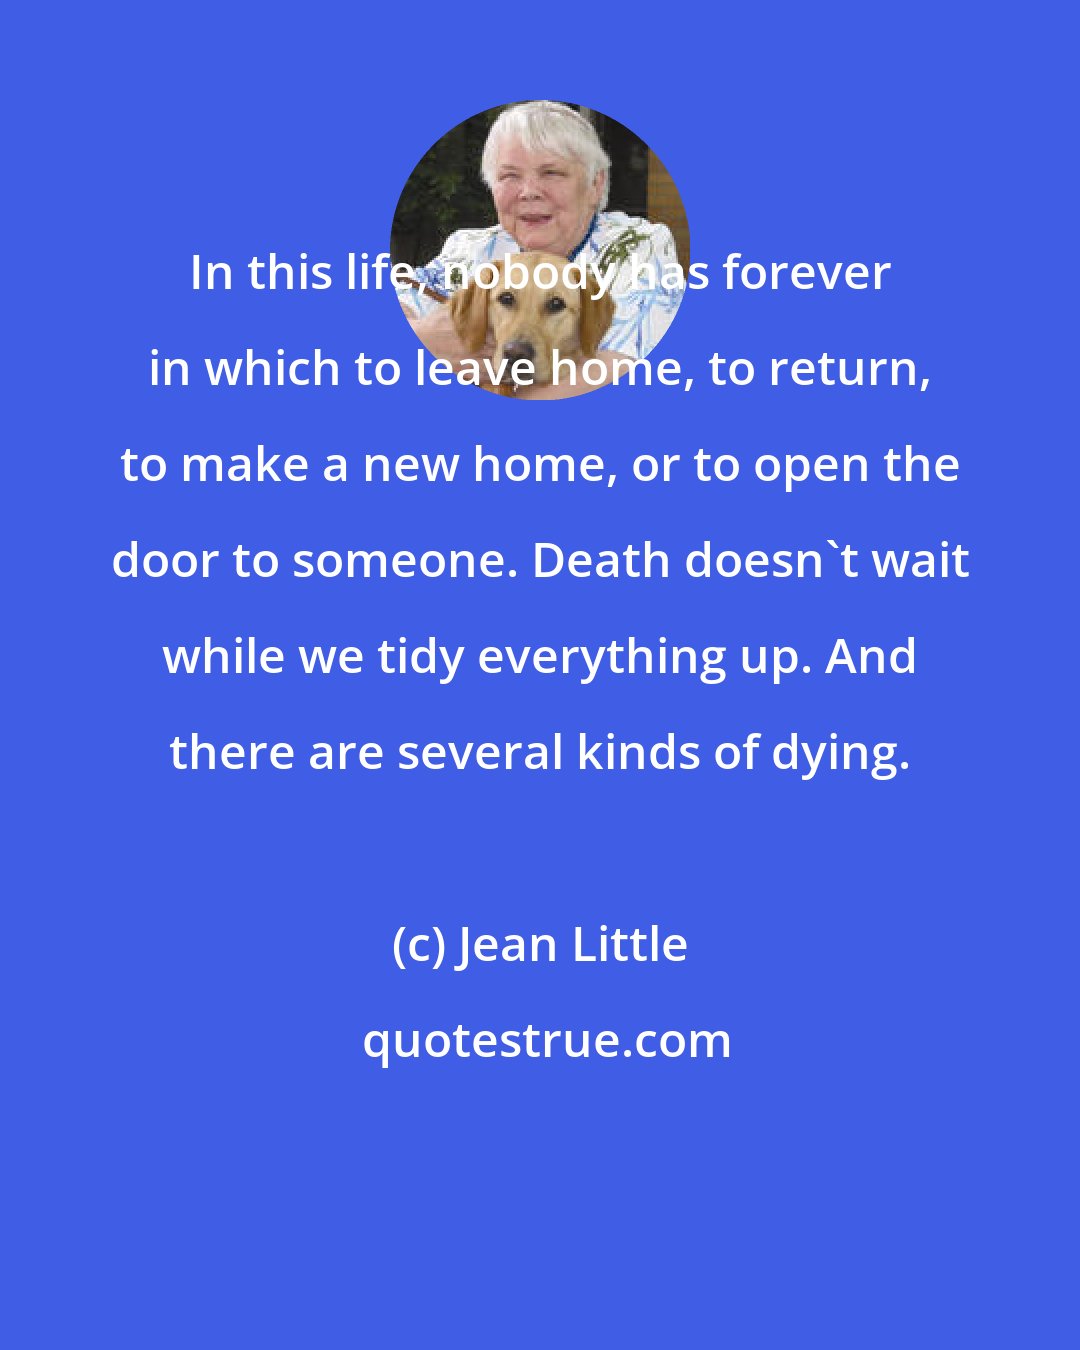 Jean Little: In this life, nobody has forever in which to leave home, to return, to make a new home, or to open the door to someone. Death doesn't wait while we tidy everything up. And there are several kinds of dying.